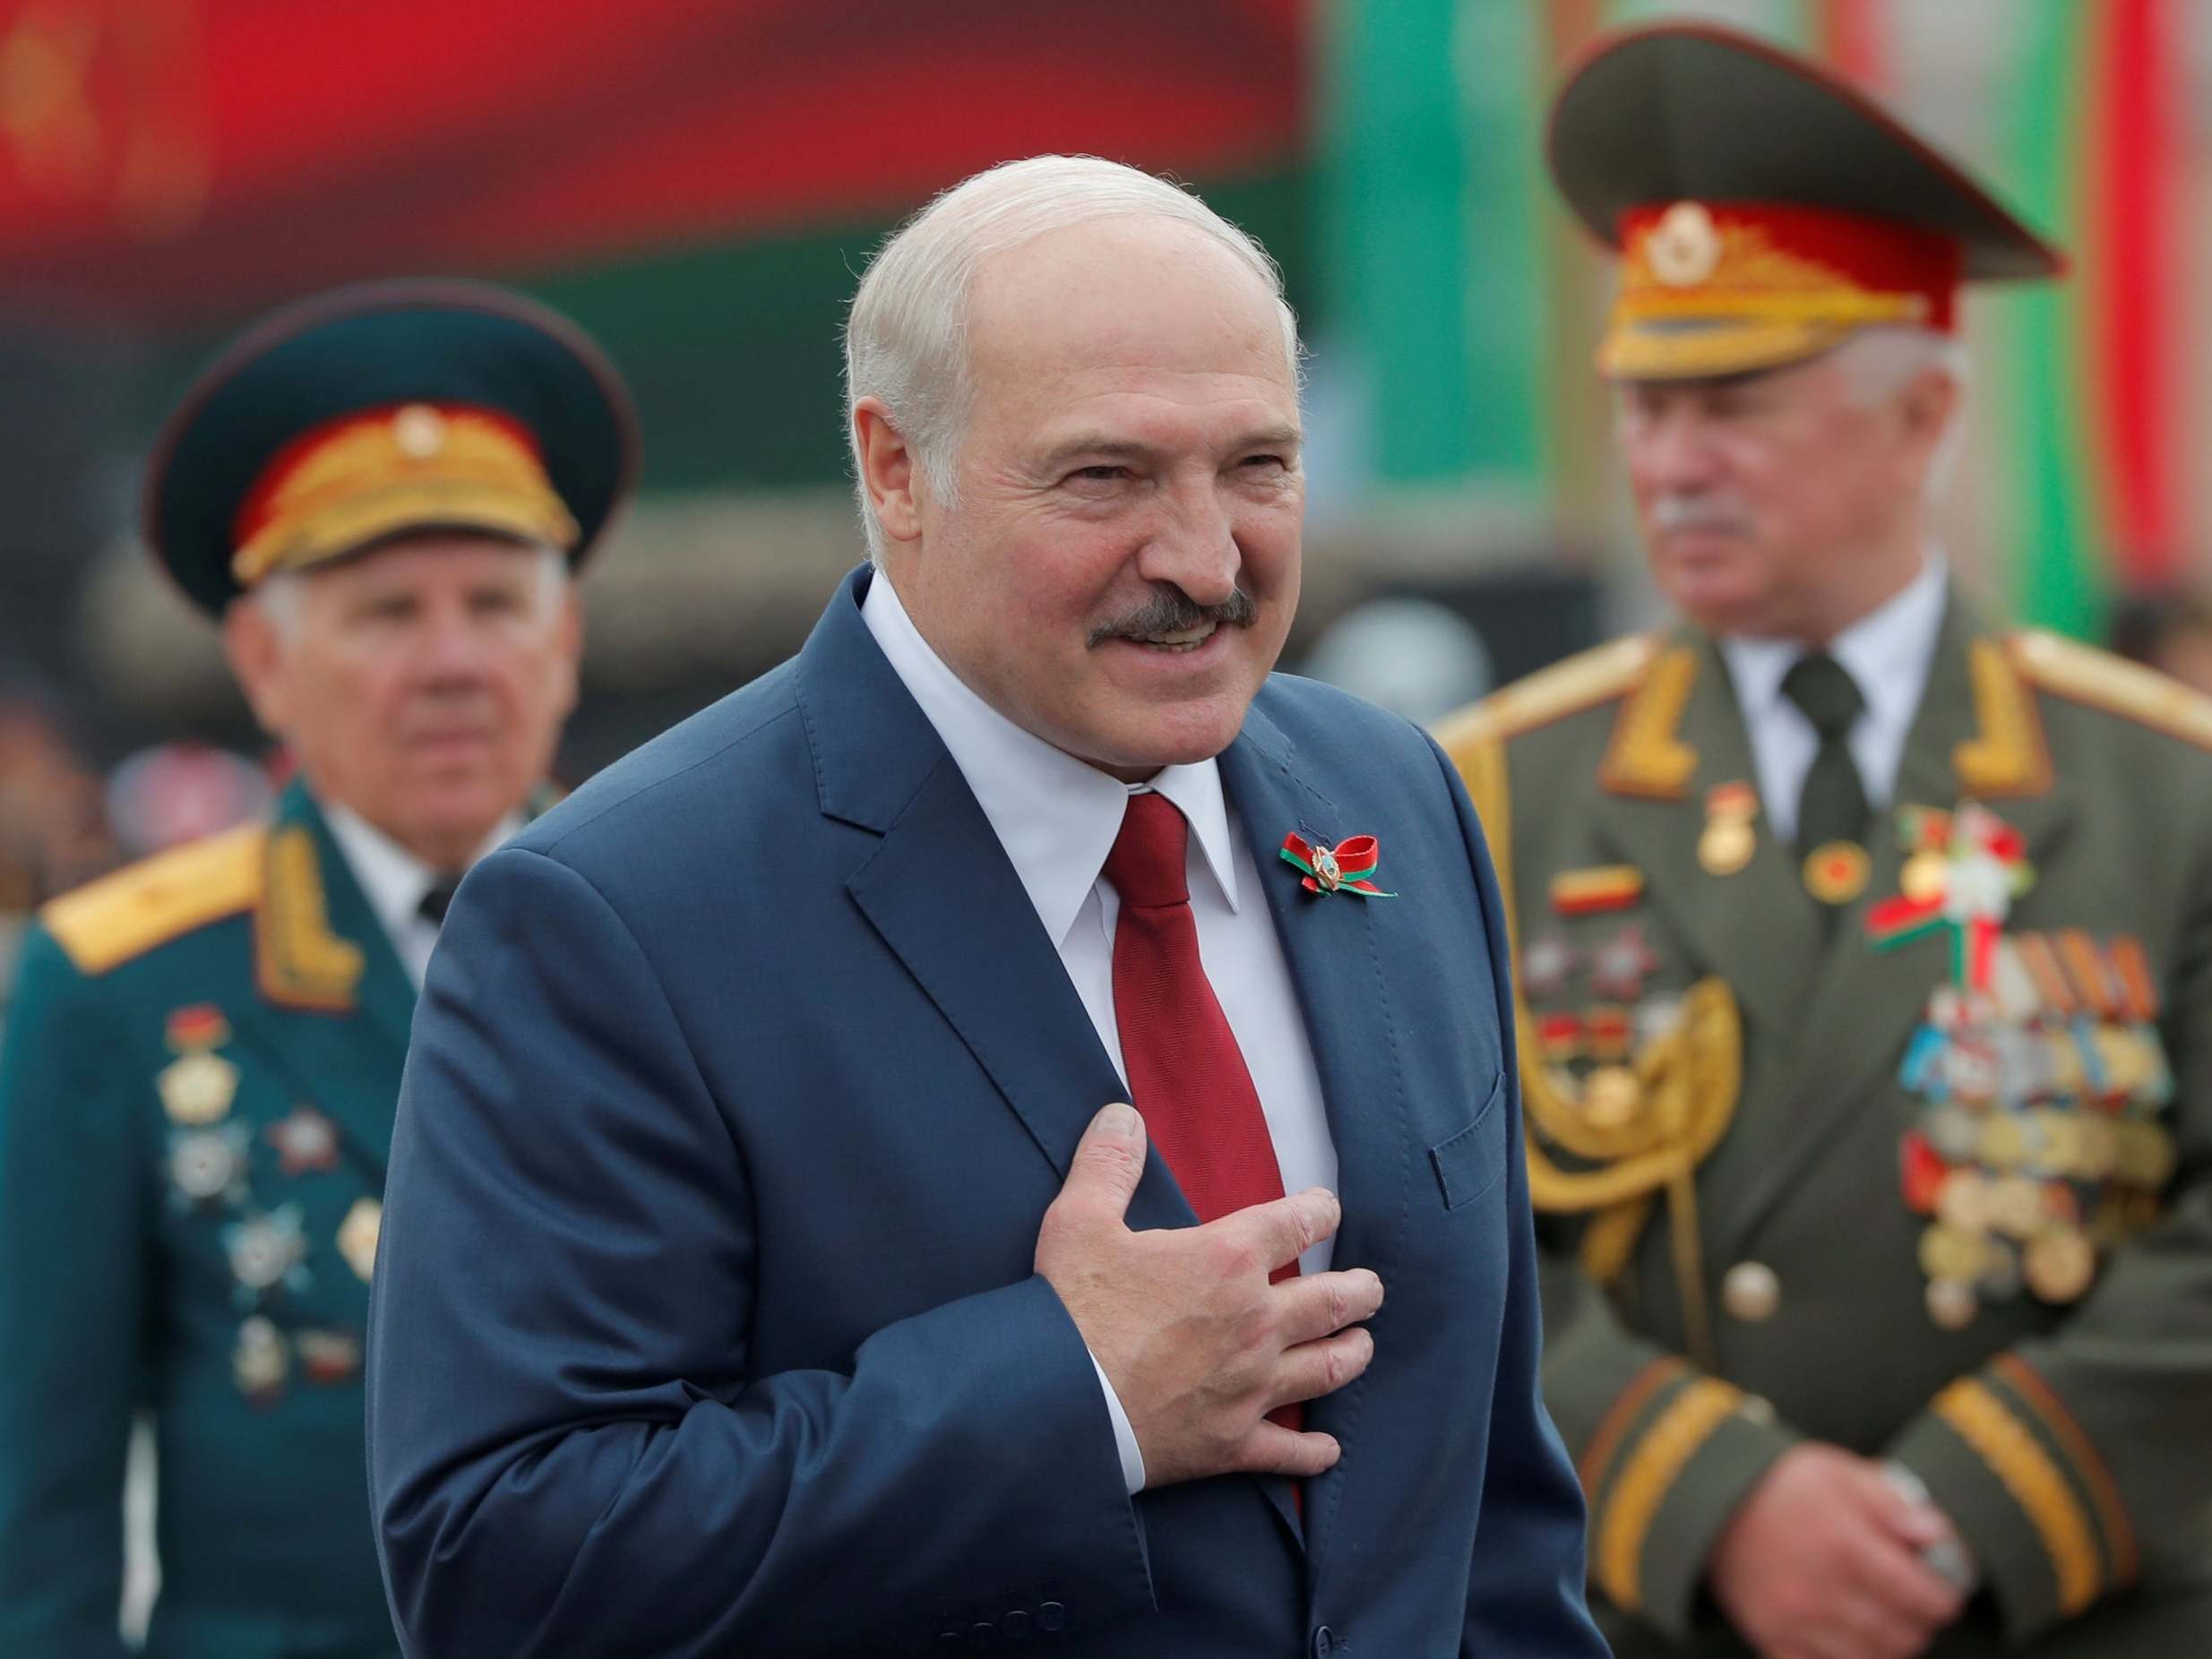 Police have arrested over 1,360 anti-Lukashenko protesters since May